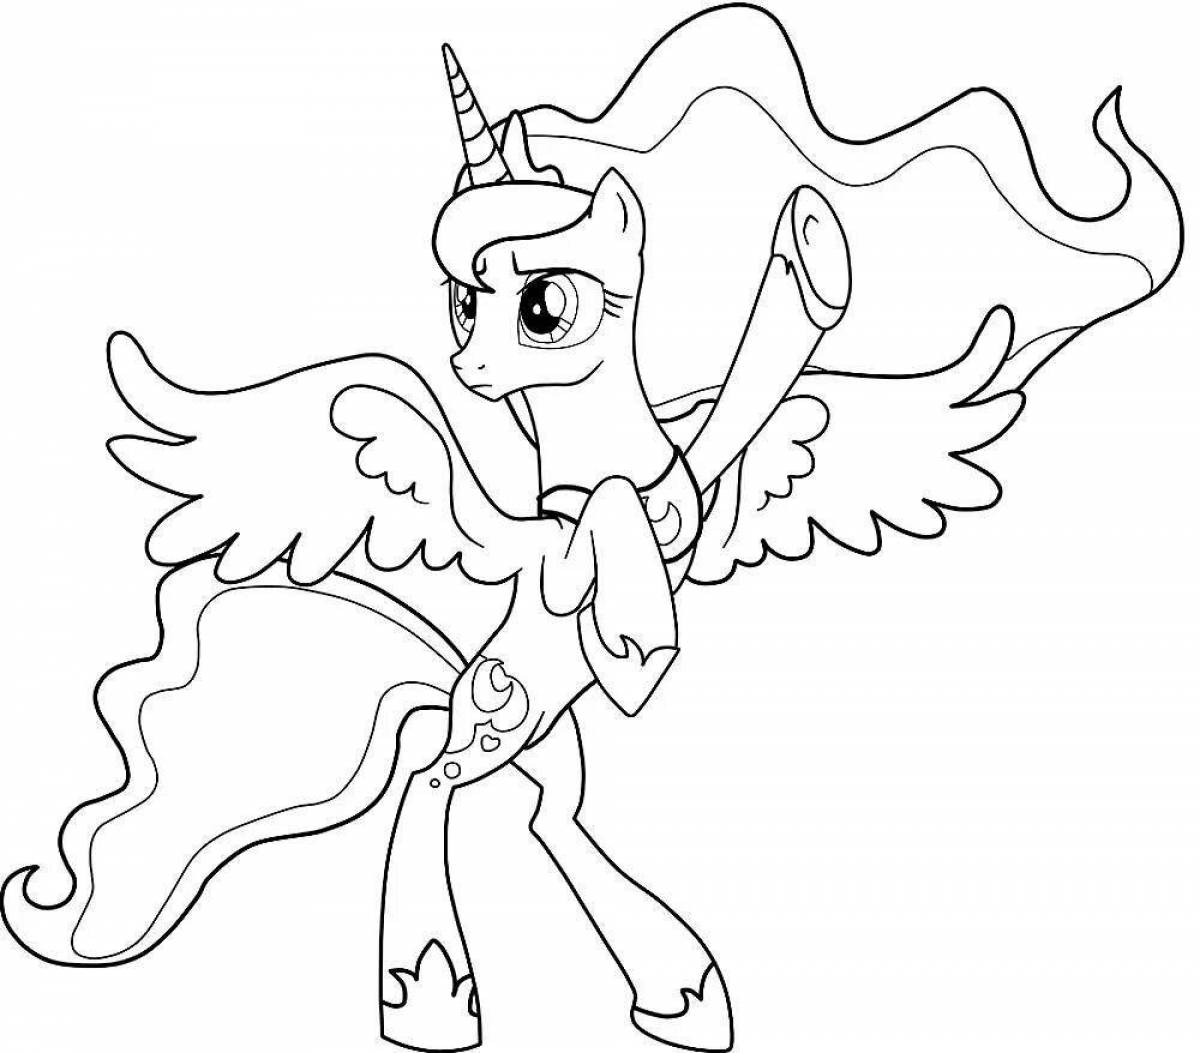 Exquisite little pony coloring book